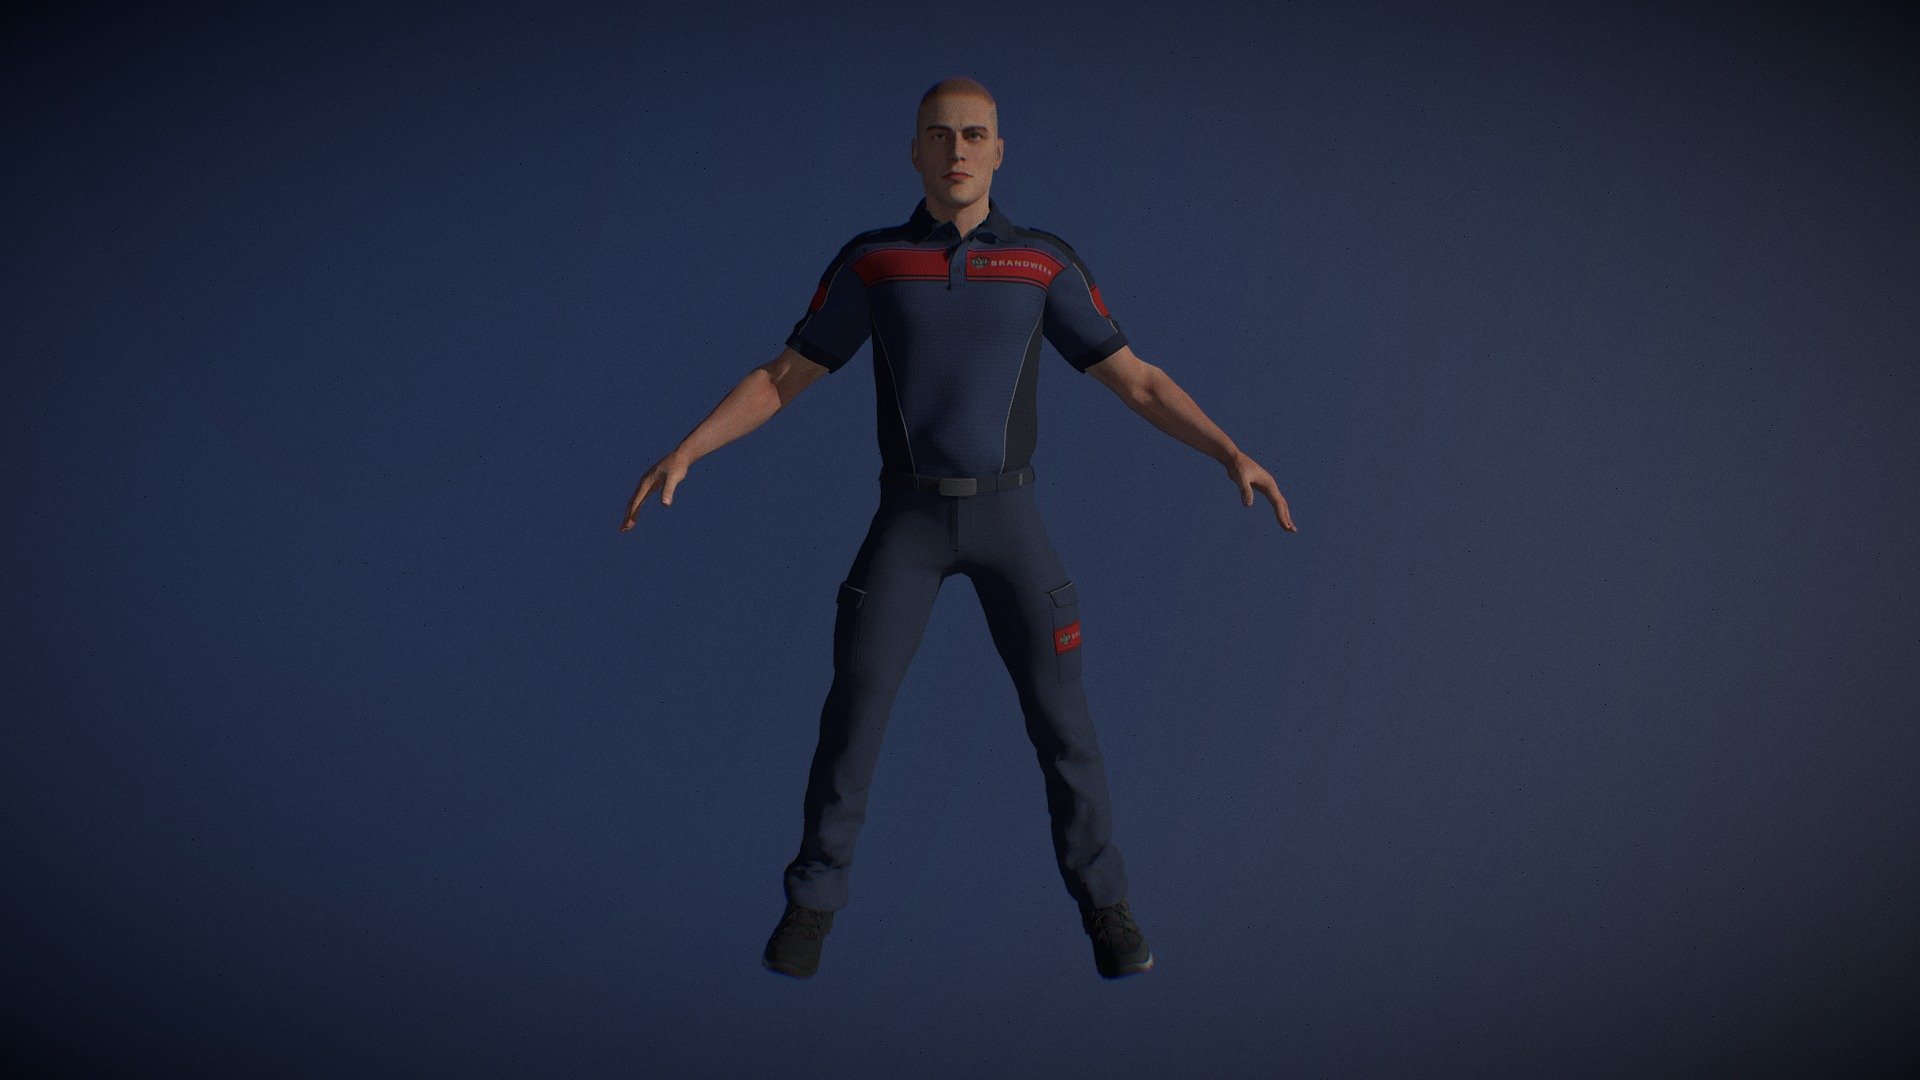 For a custom VR dutch emergency service scenario simulation project, we made a custom dutch firefighter male officer model with realistic details and rigged to the unreal engine 4 skeleton.

The related VR project is as experimental to learn diffirent scenario’s as a emergency  service member, and how it is like being in a world where everything can happen just as in real life. This model and the project affiliated content will not be downloadable or available to the public.

This project is not affiliated to the original author AKA Brandweer Nederland and its subsidaries 3d model